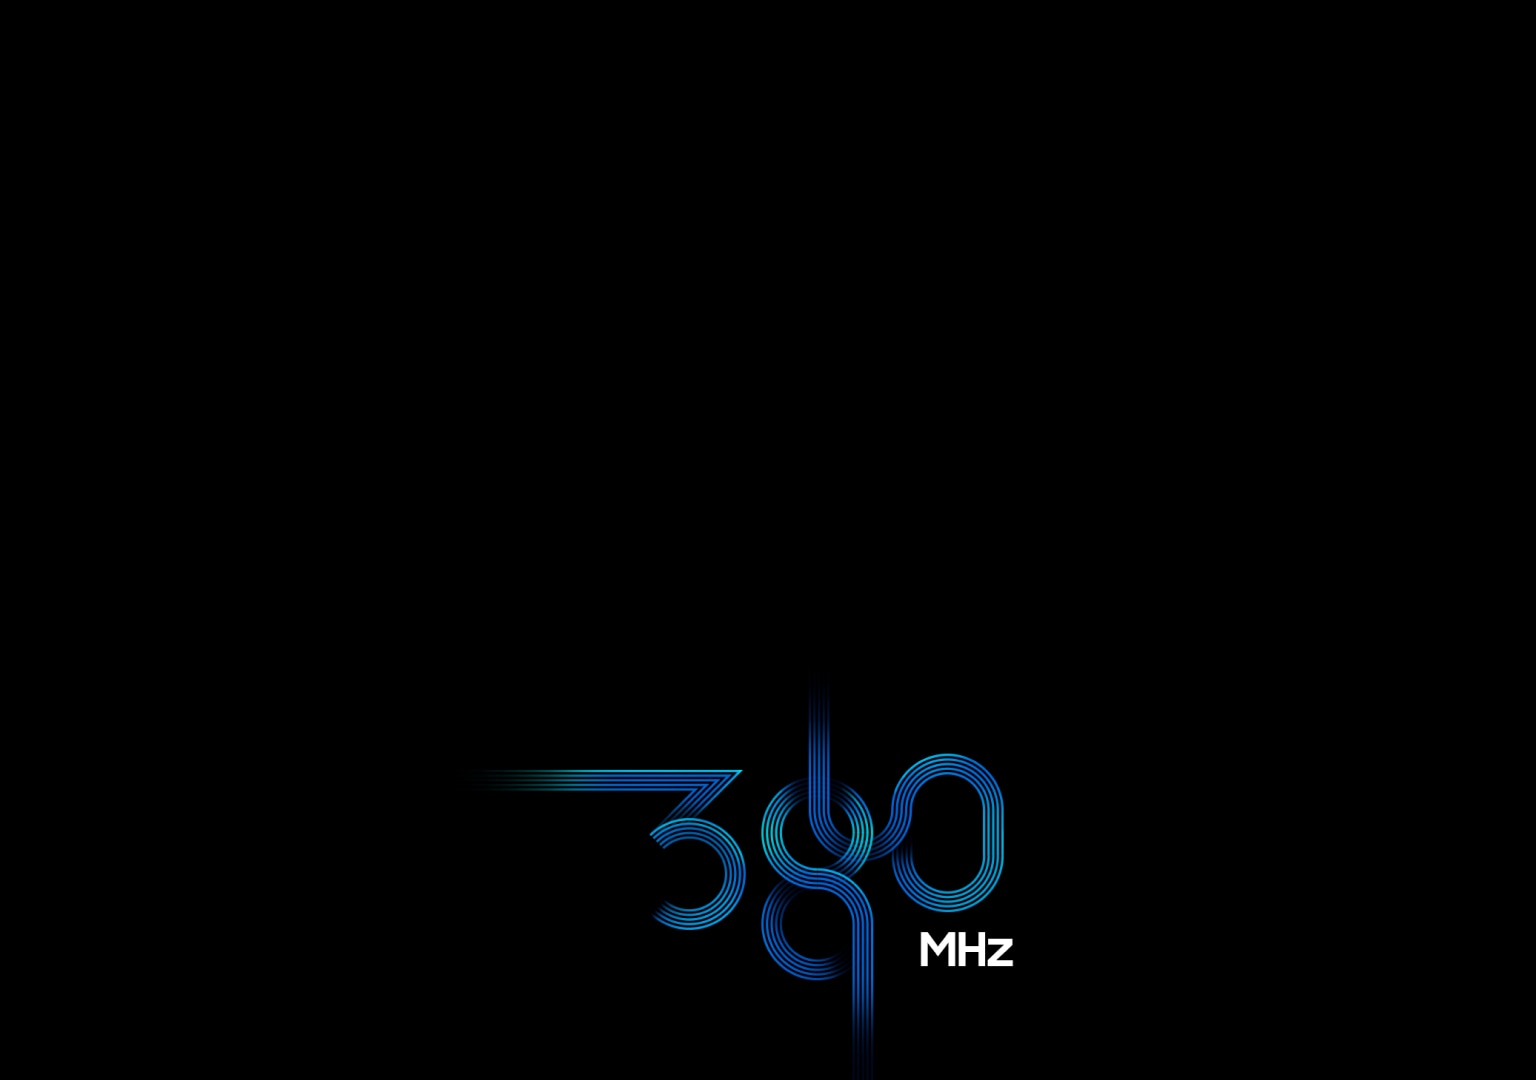 360 MHz, depicted in a dynamic, ribbon-like style with blue gradients.